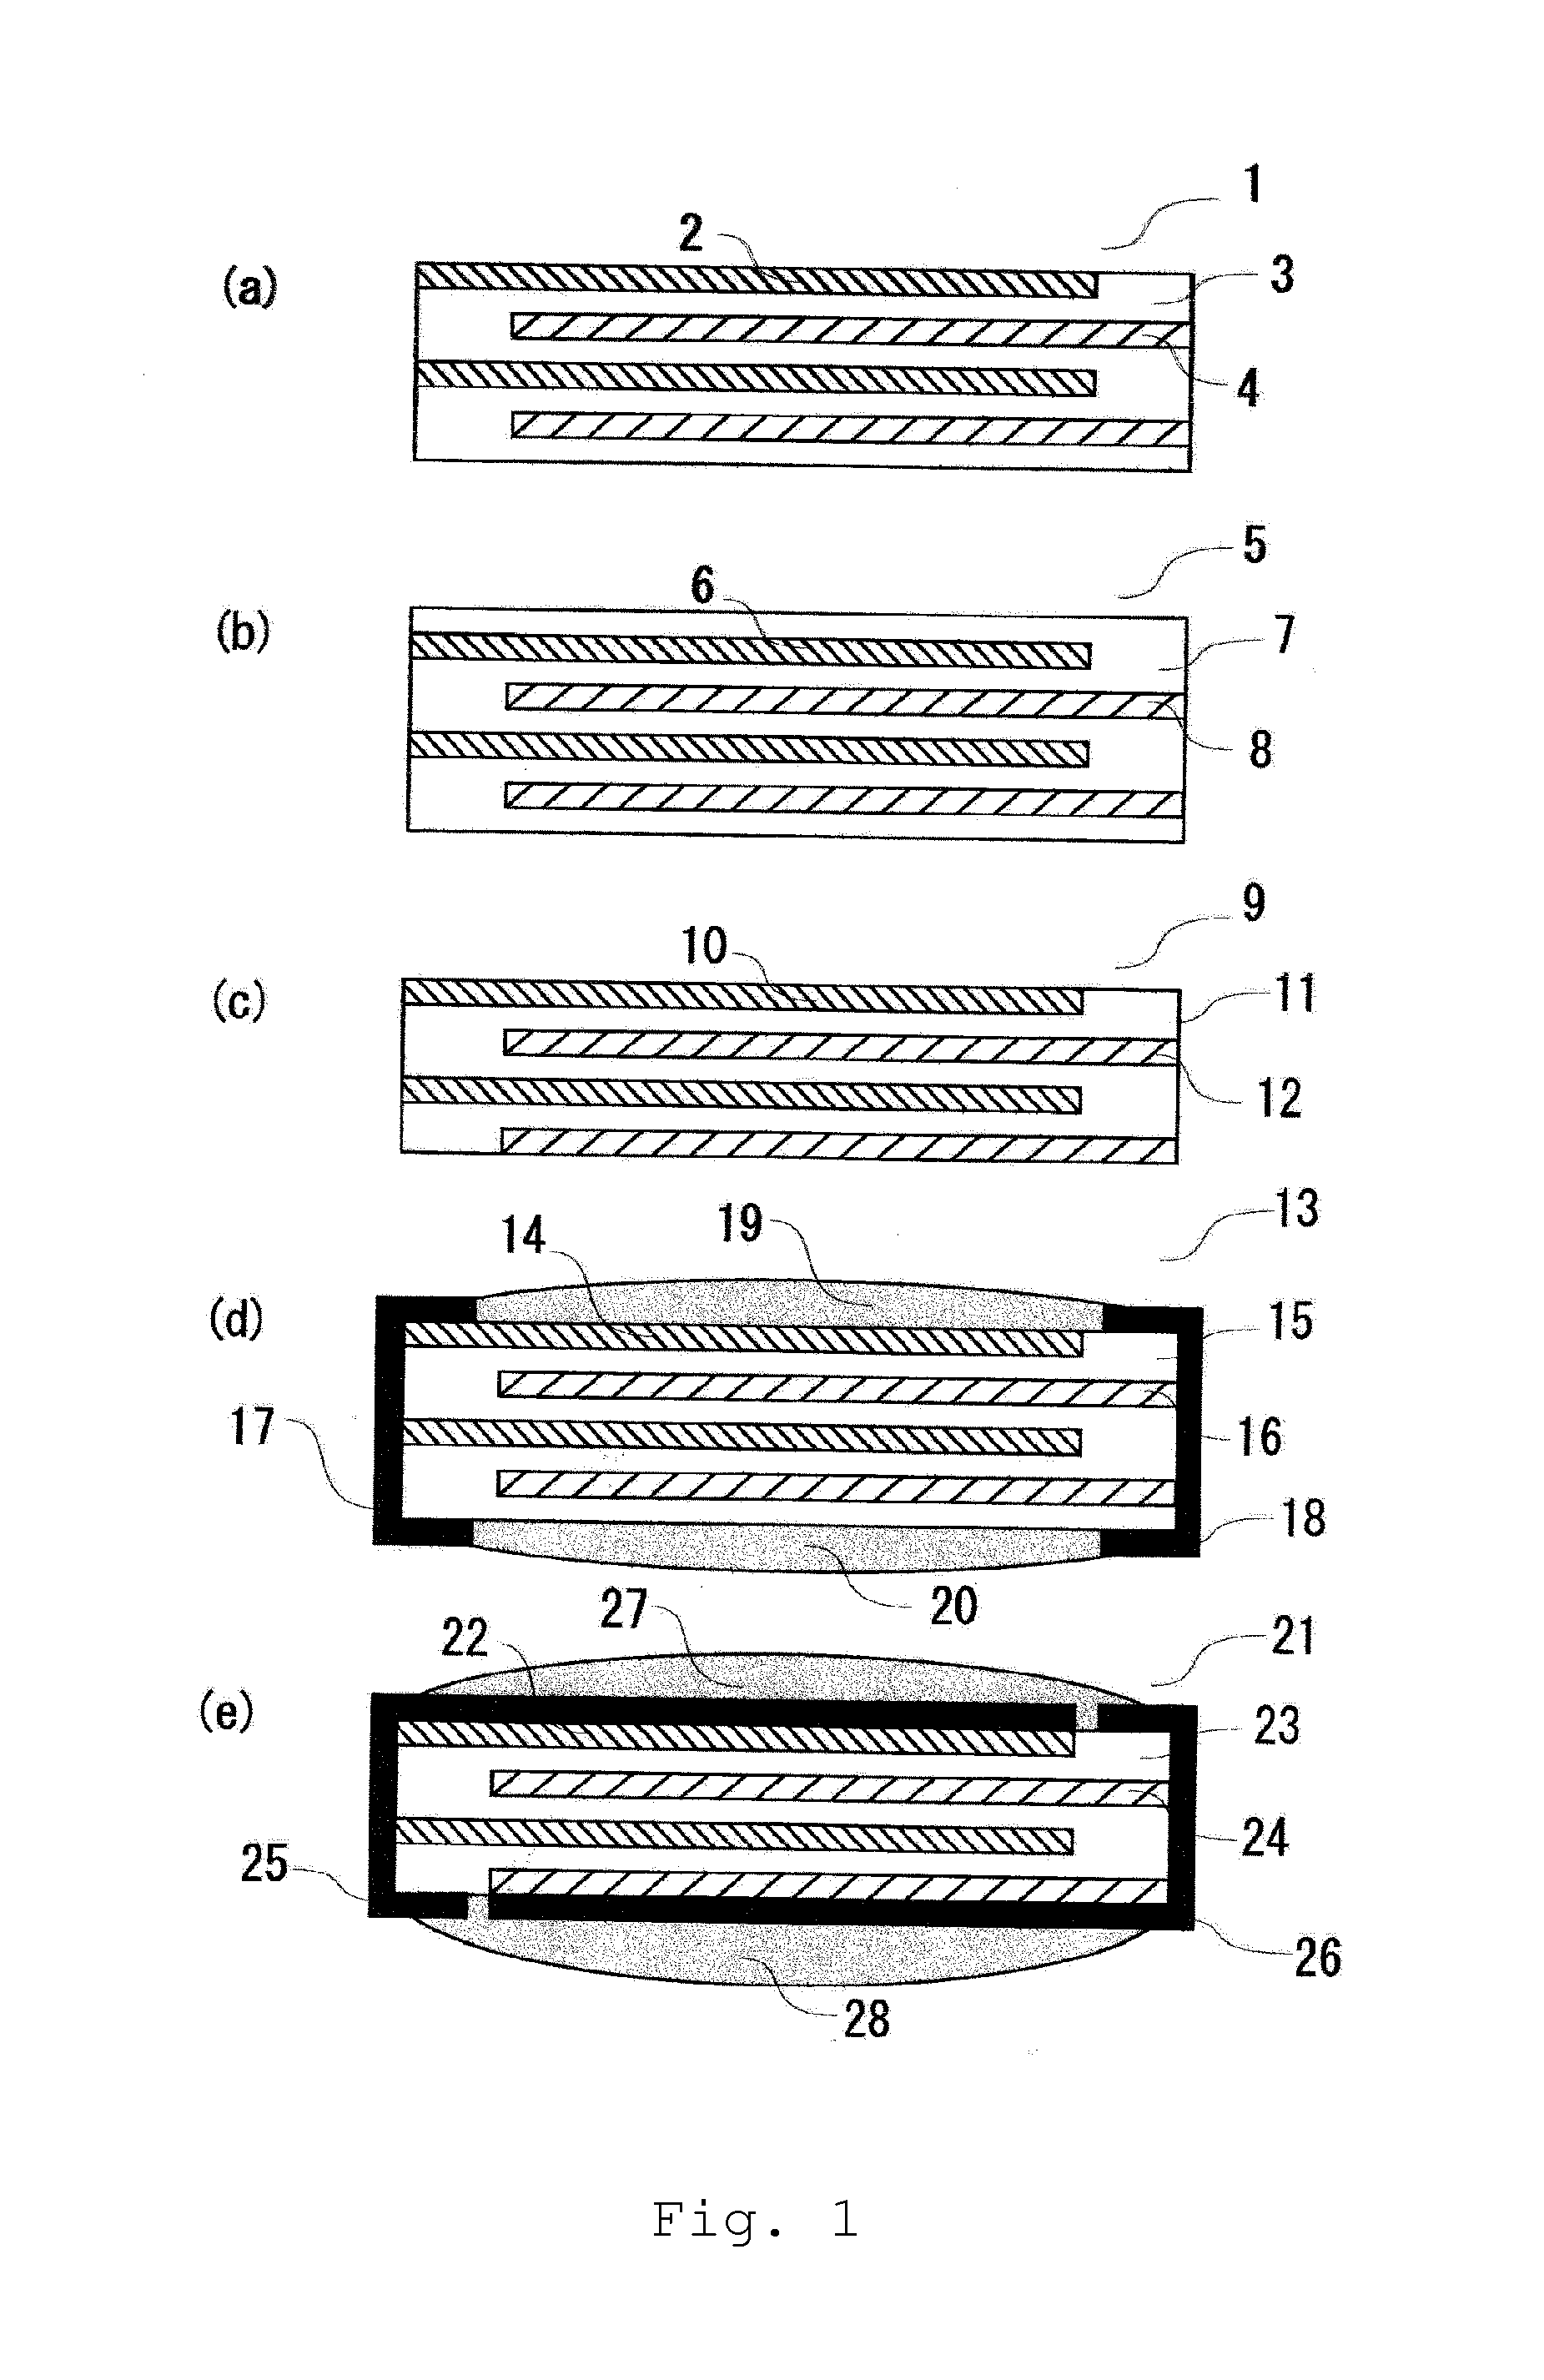 Lithium ion secondary battery and method for manufacturing same